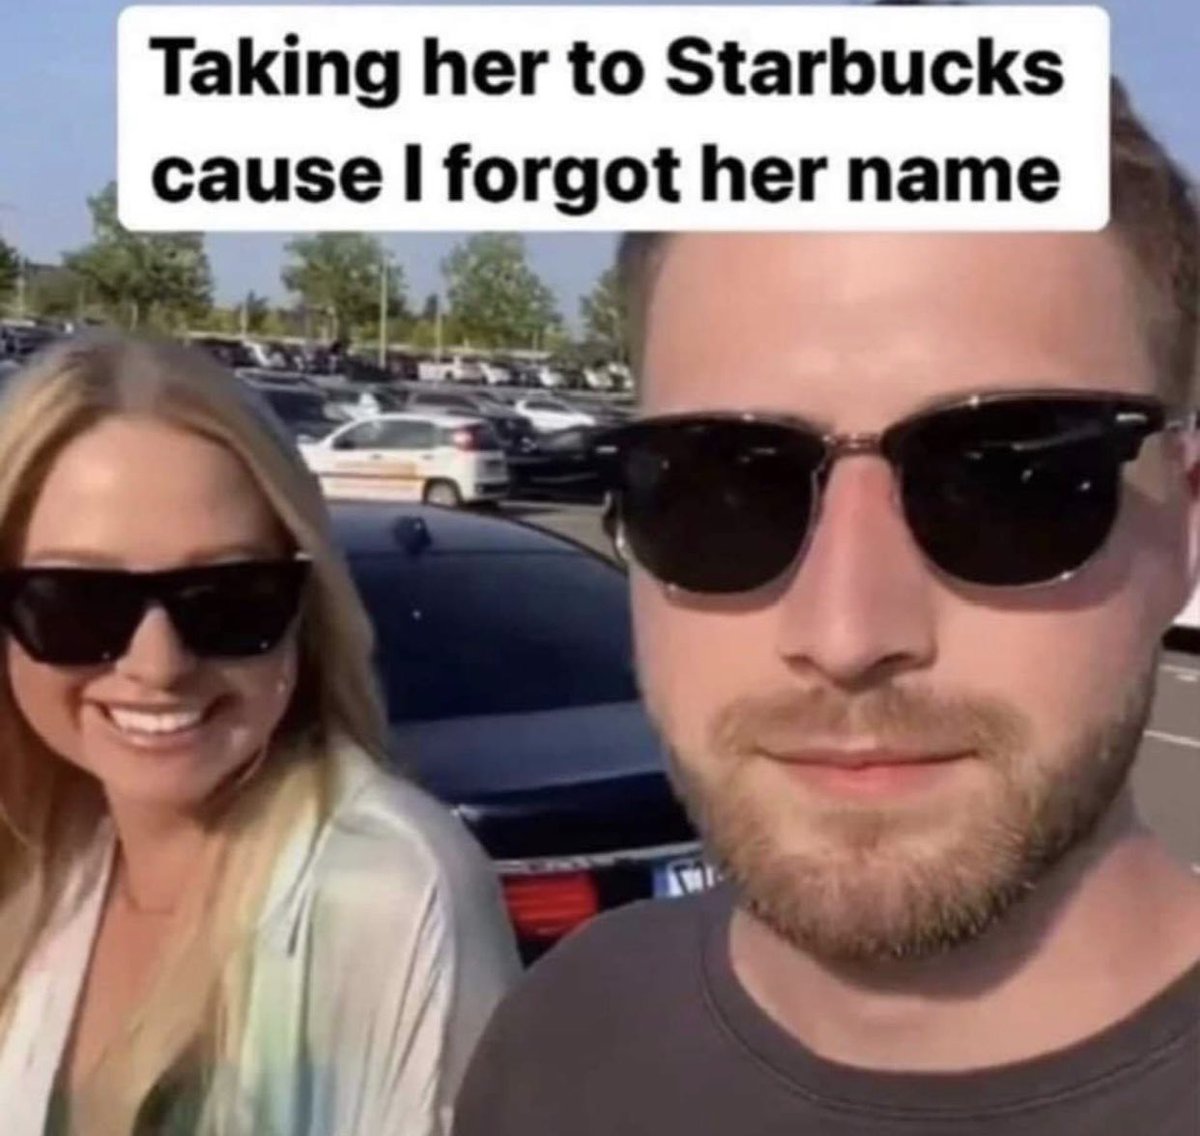 dudes posting their w's - taking her to starbucks because i forgot her name - Taking her to Starbucks cause I forgot her name